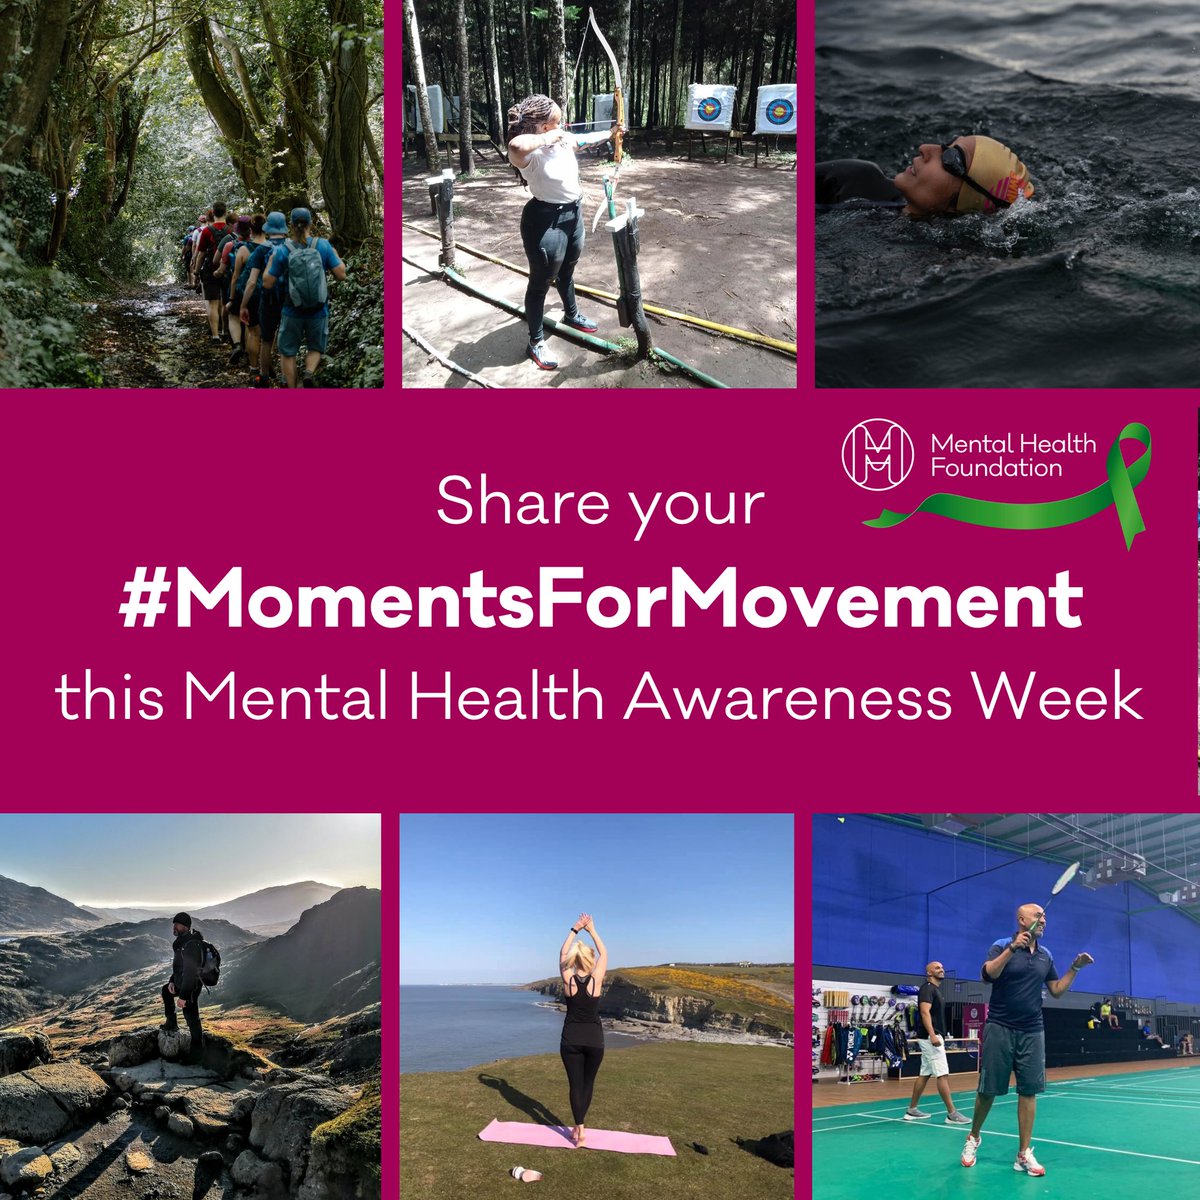 This #MentalHealthAwarenessWeek, let’s move more for our mental health. Join in by finding and sharing your #MomentsForMovement during the week! Find out more: mentalhealth.org.uk/mhaw